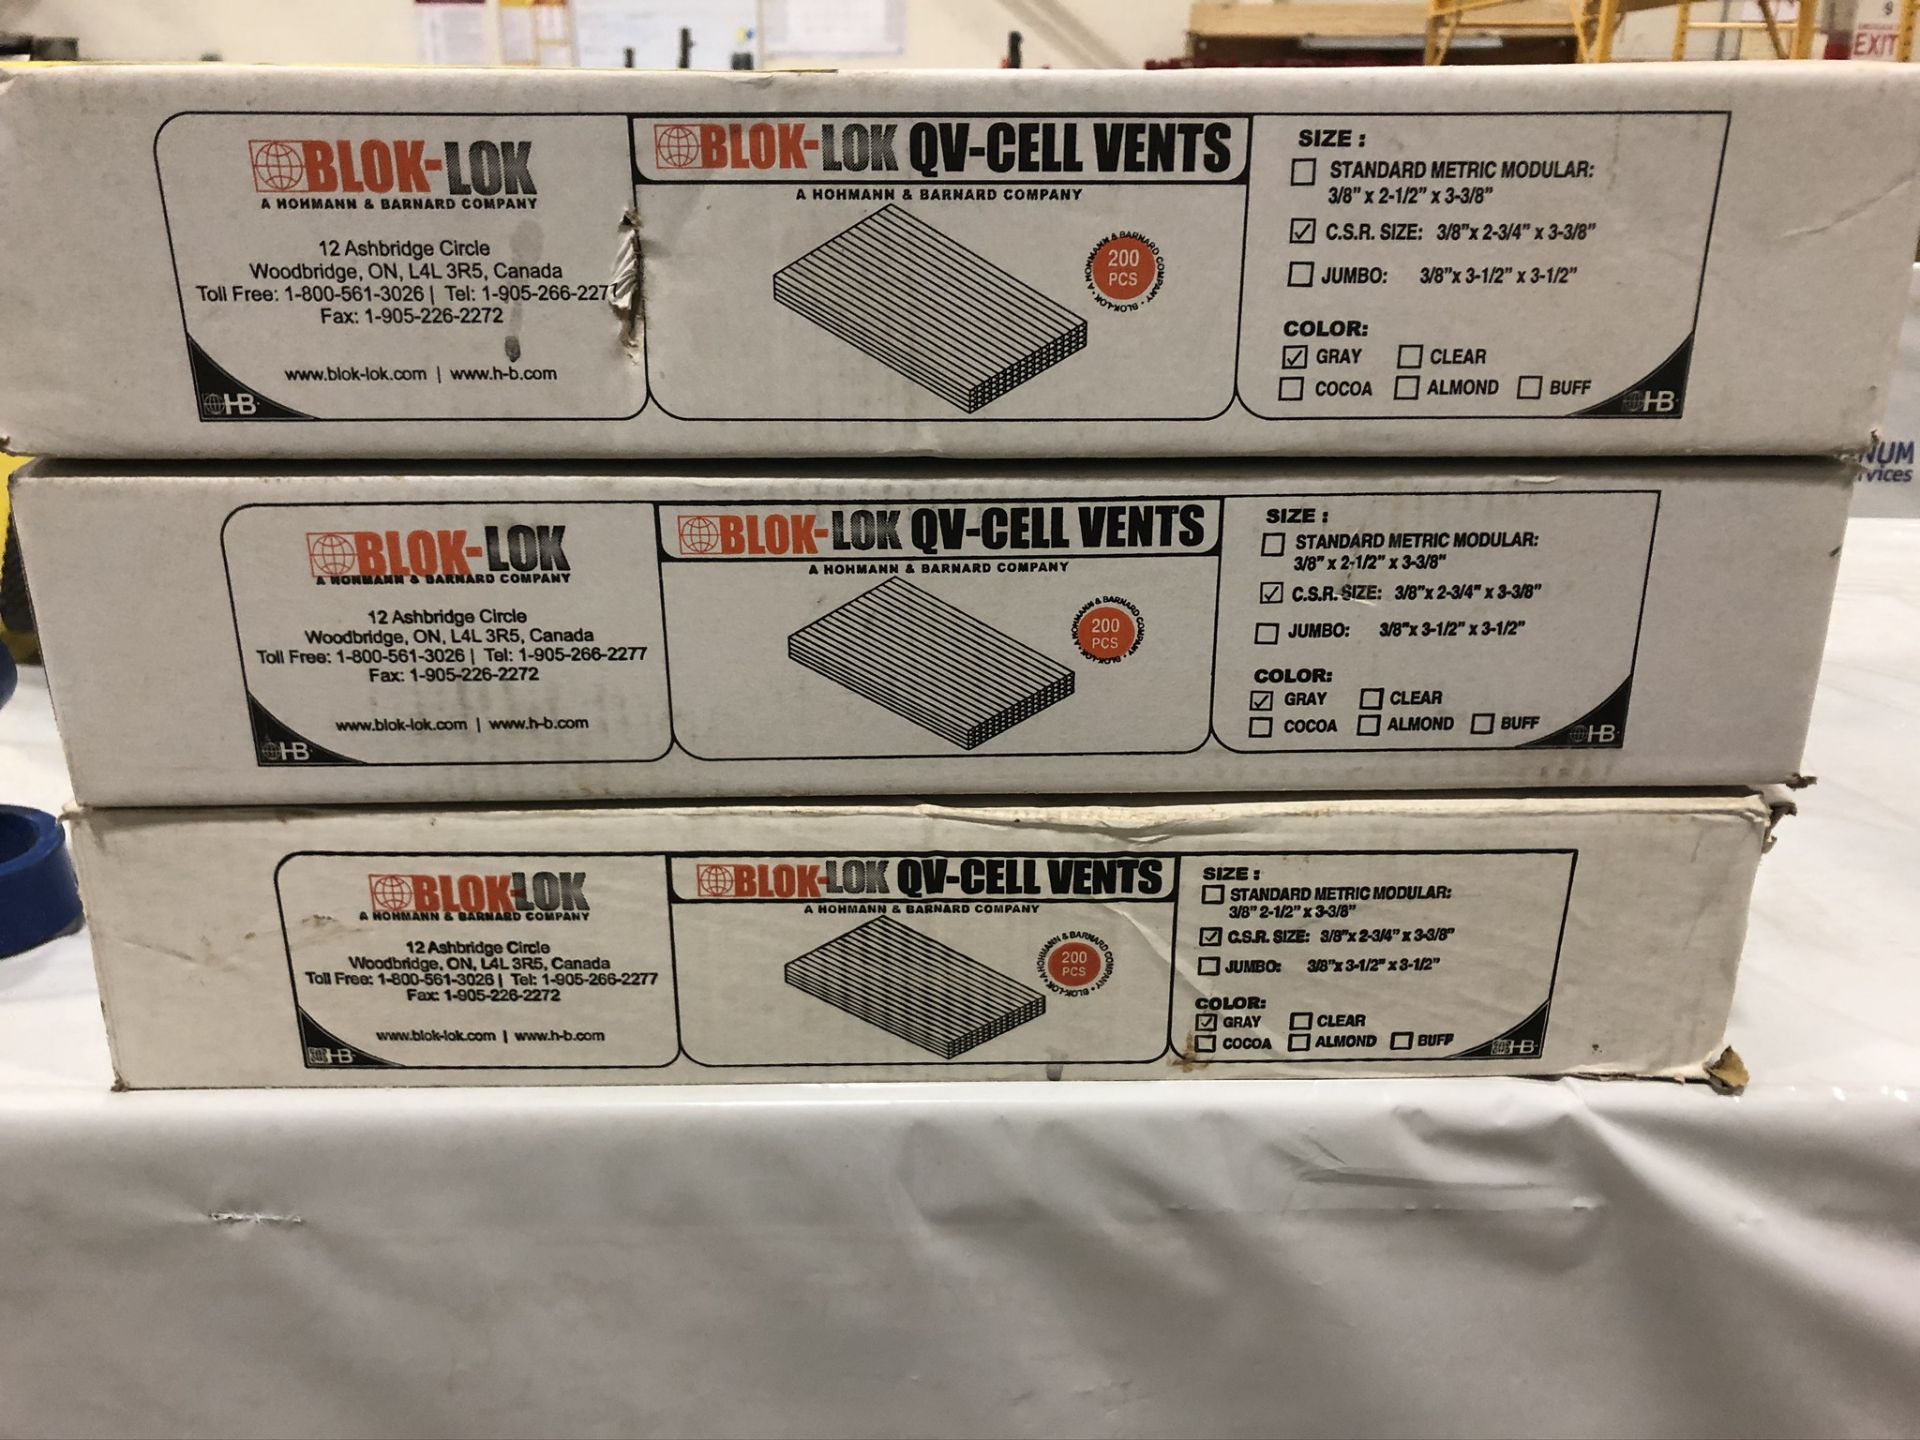 BLOK-LOQ, GRAY, QV-CELL VENTS (NEW IN BOX) - Image 2 of 2